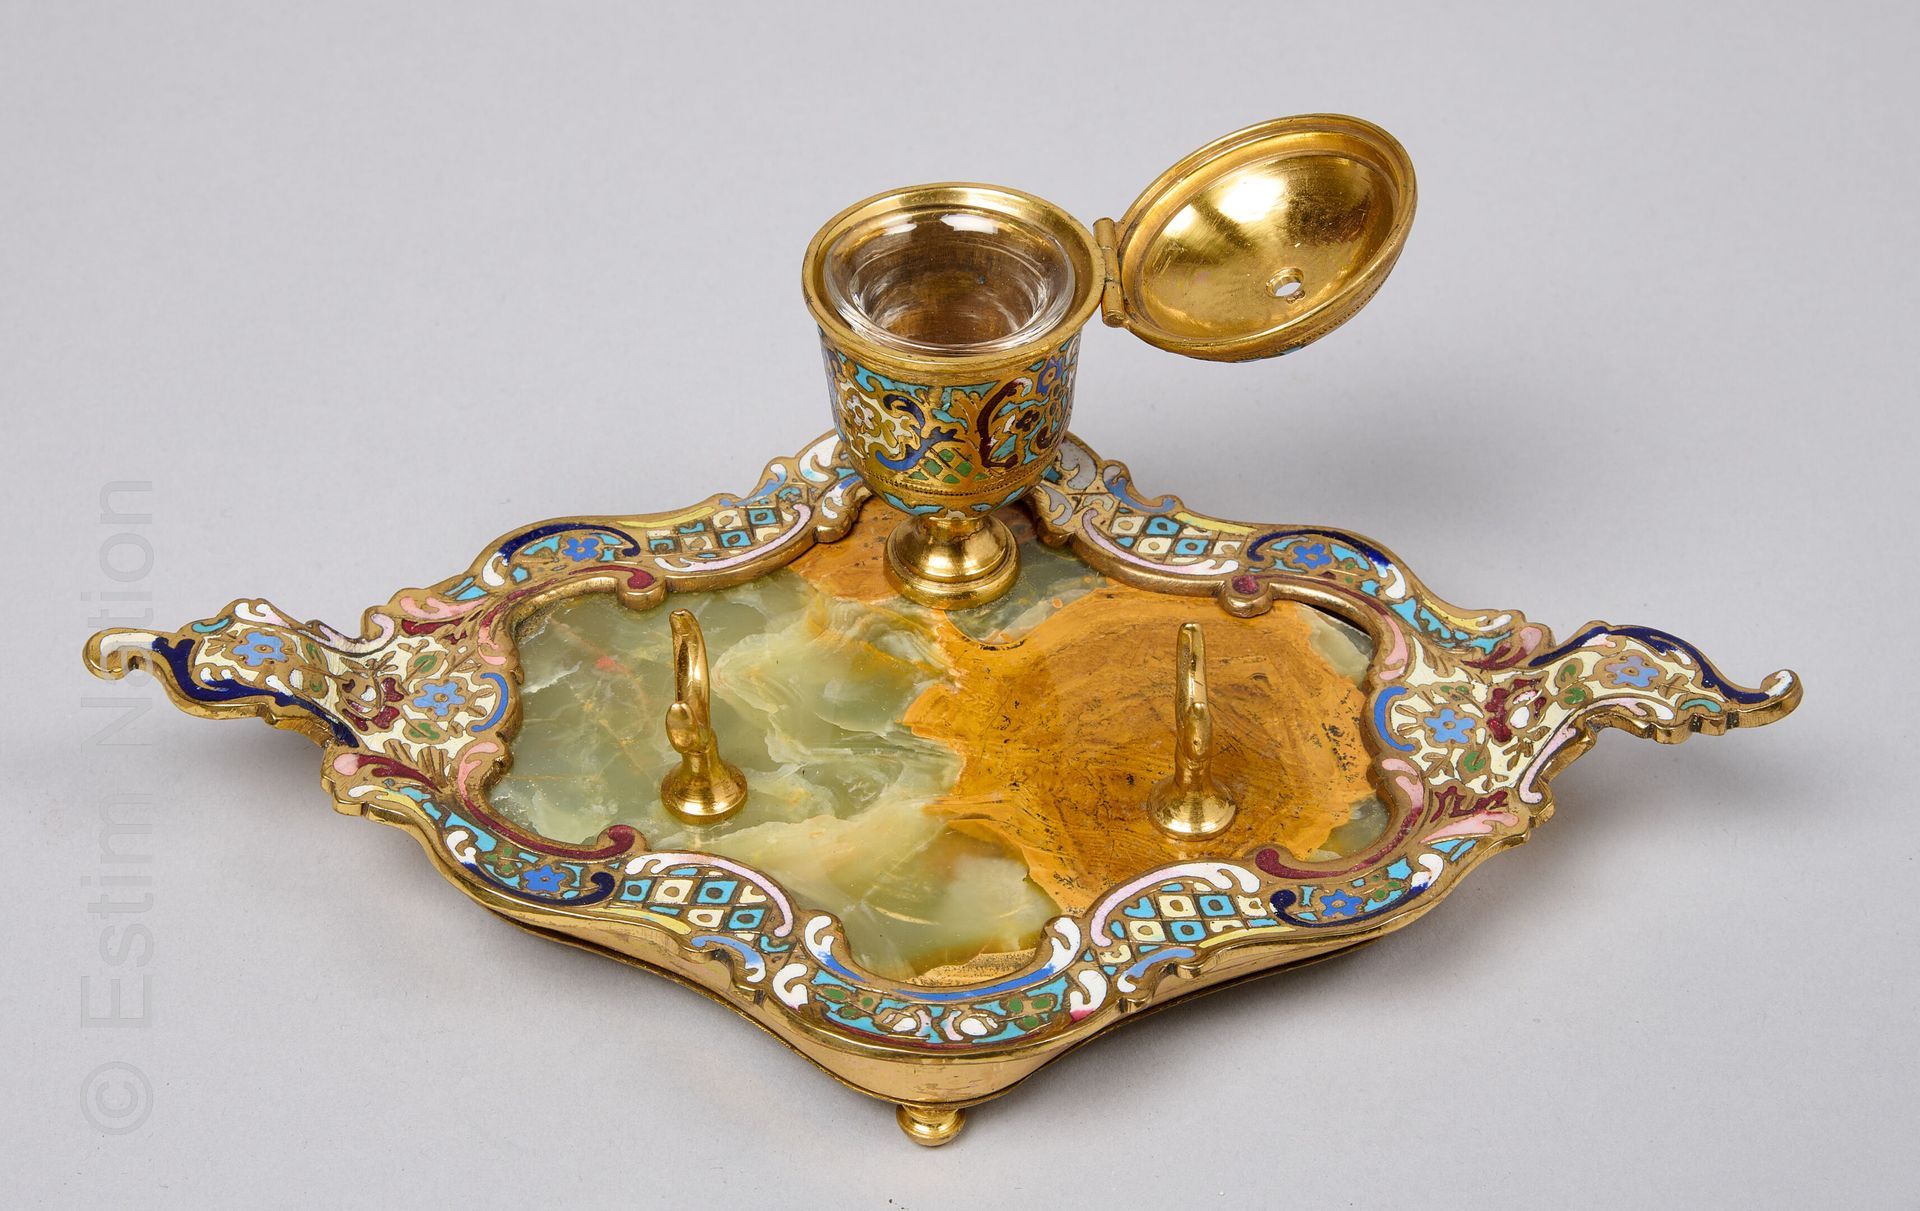 ARTS DECORATIFS - CLOISONNES Charming inkwell in bronze and cloisonné enamels of&hellip;